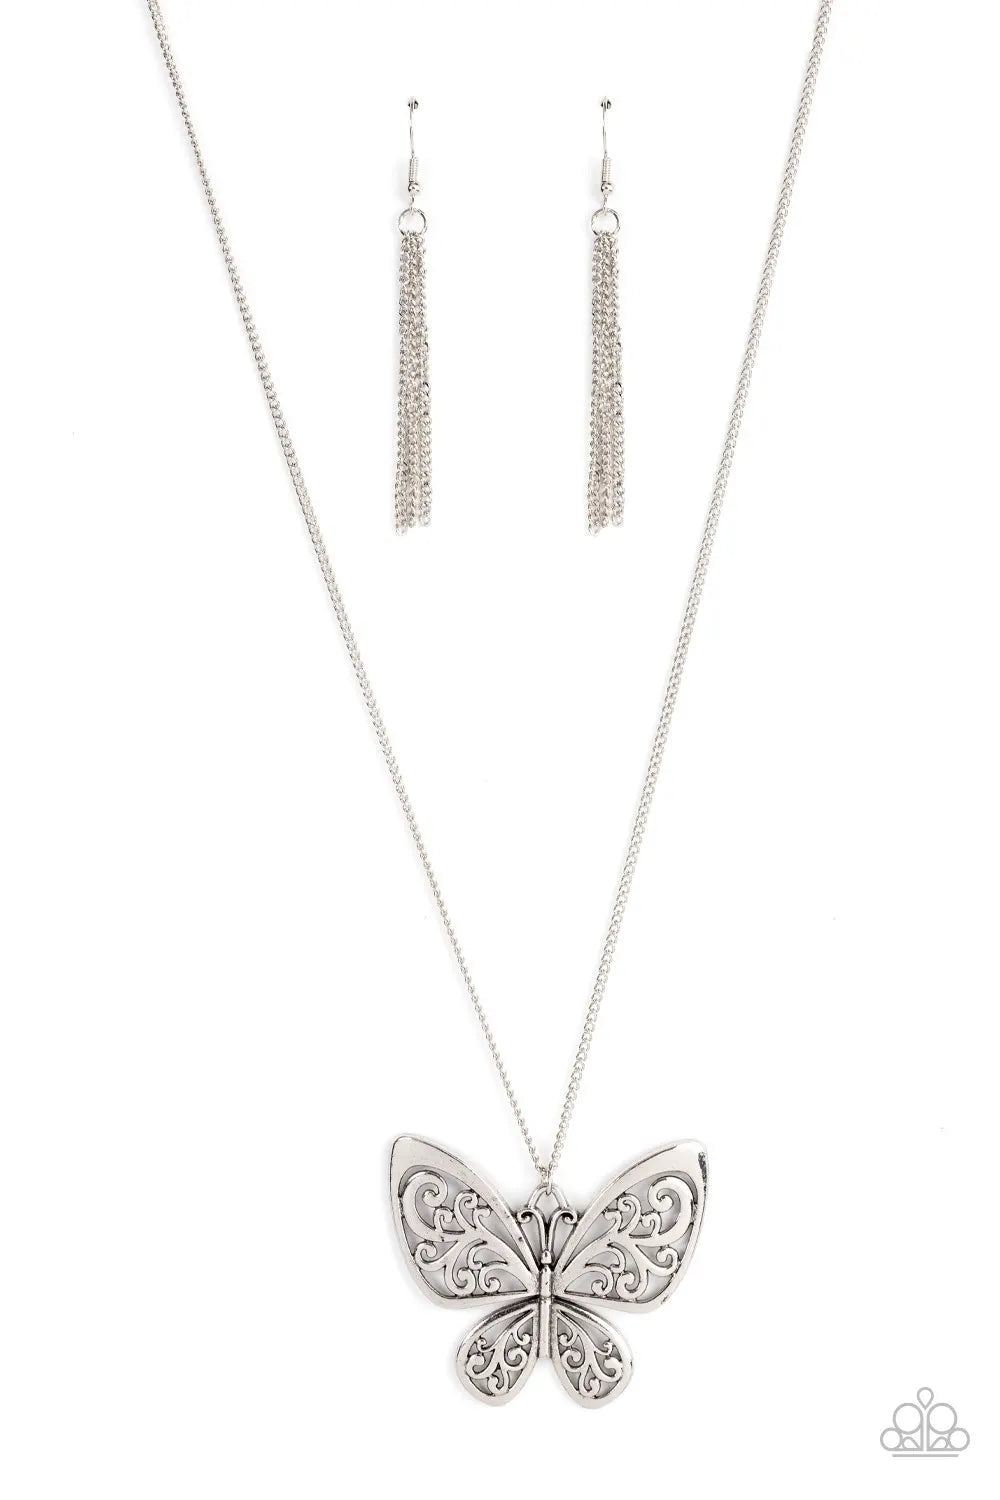 Butterfly Boutique - Silver Necklace - Paparazzi Accessories - Filled with frilly filigree details, a rustic silver butterfly flutters from the bottom of an extended silver chain for a whimsical fashion. Features an adjustable clasp closure. Sold as one individual necklace.